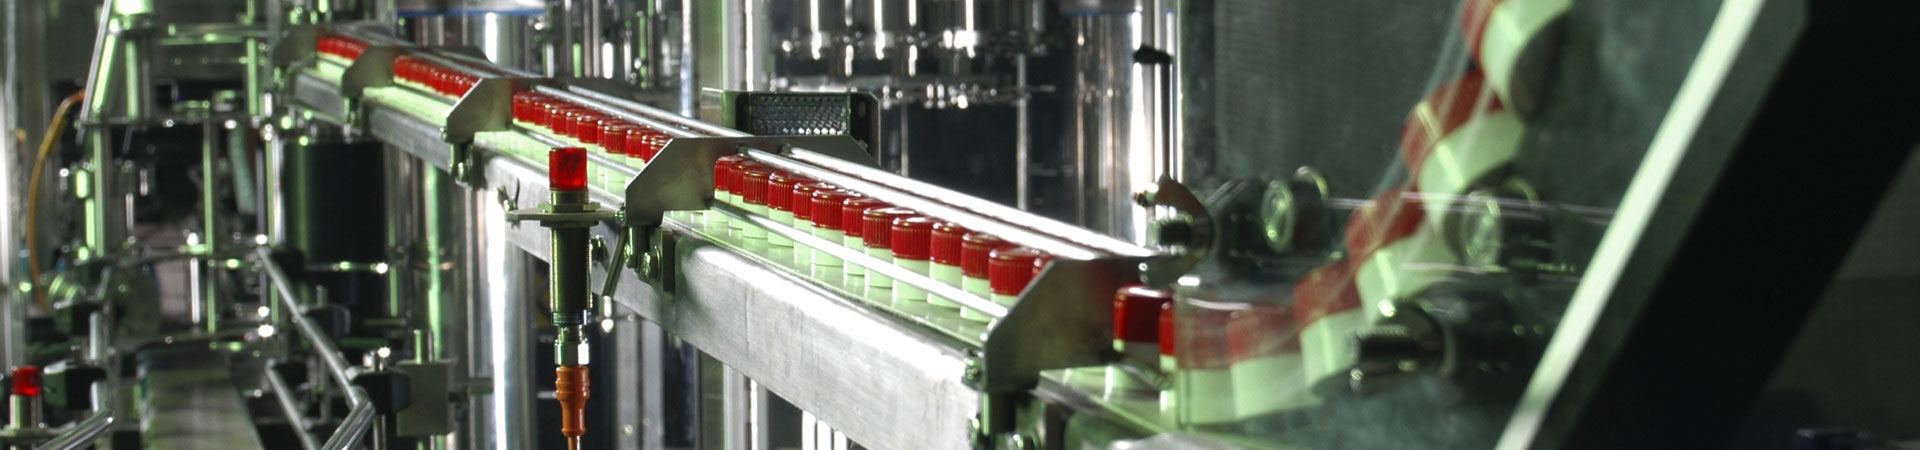 Bottles on an assembly line